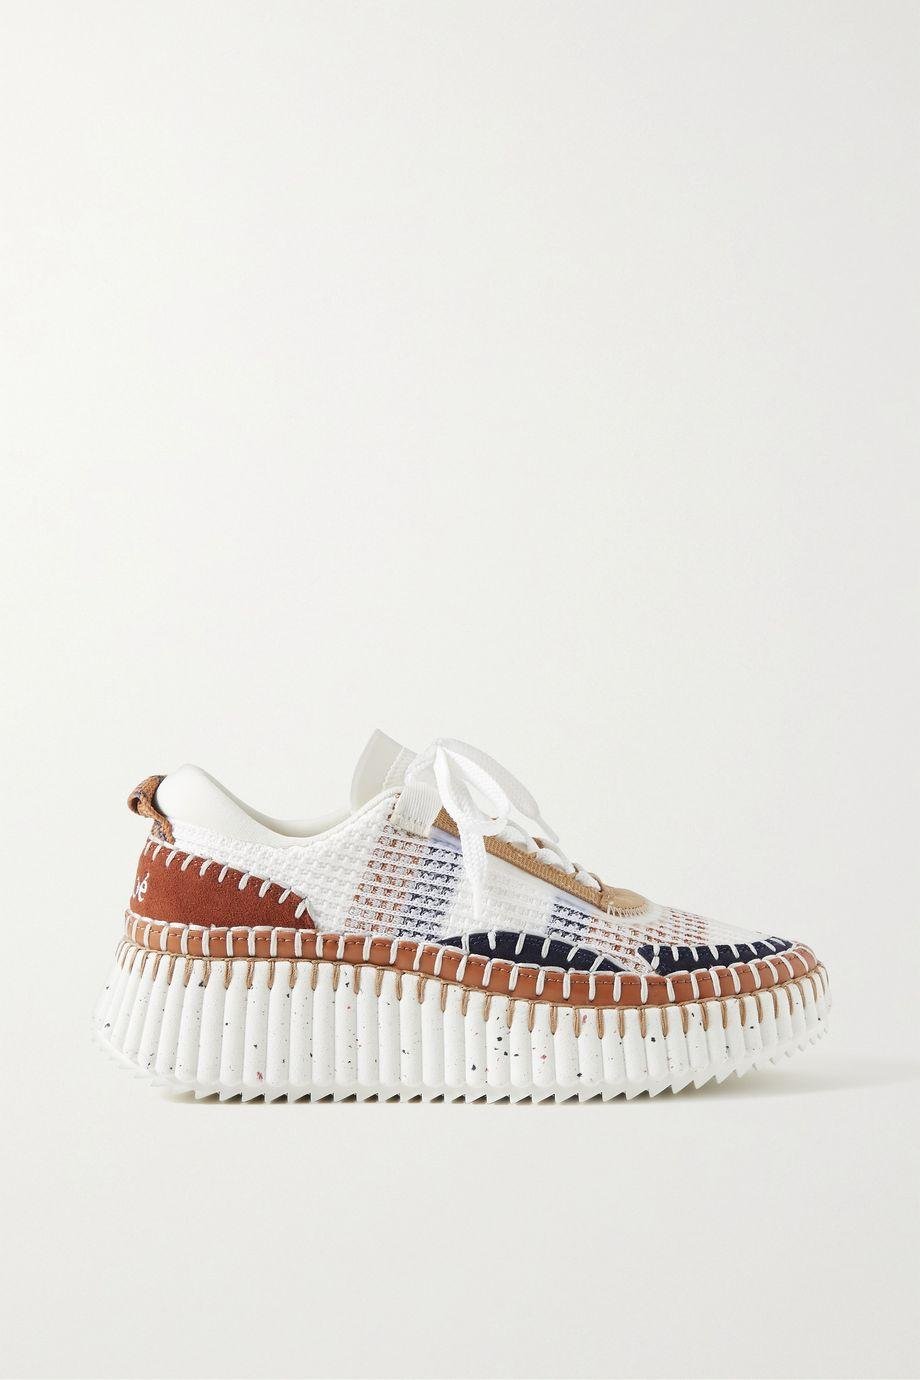 + NET SUSTAIN Nama embroidered suede and recycled-mesh sneakers by CHLOE